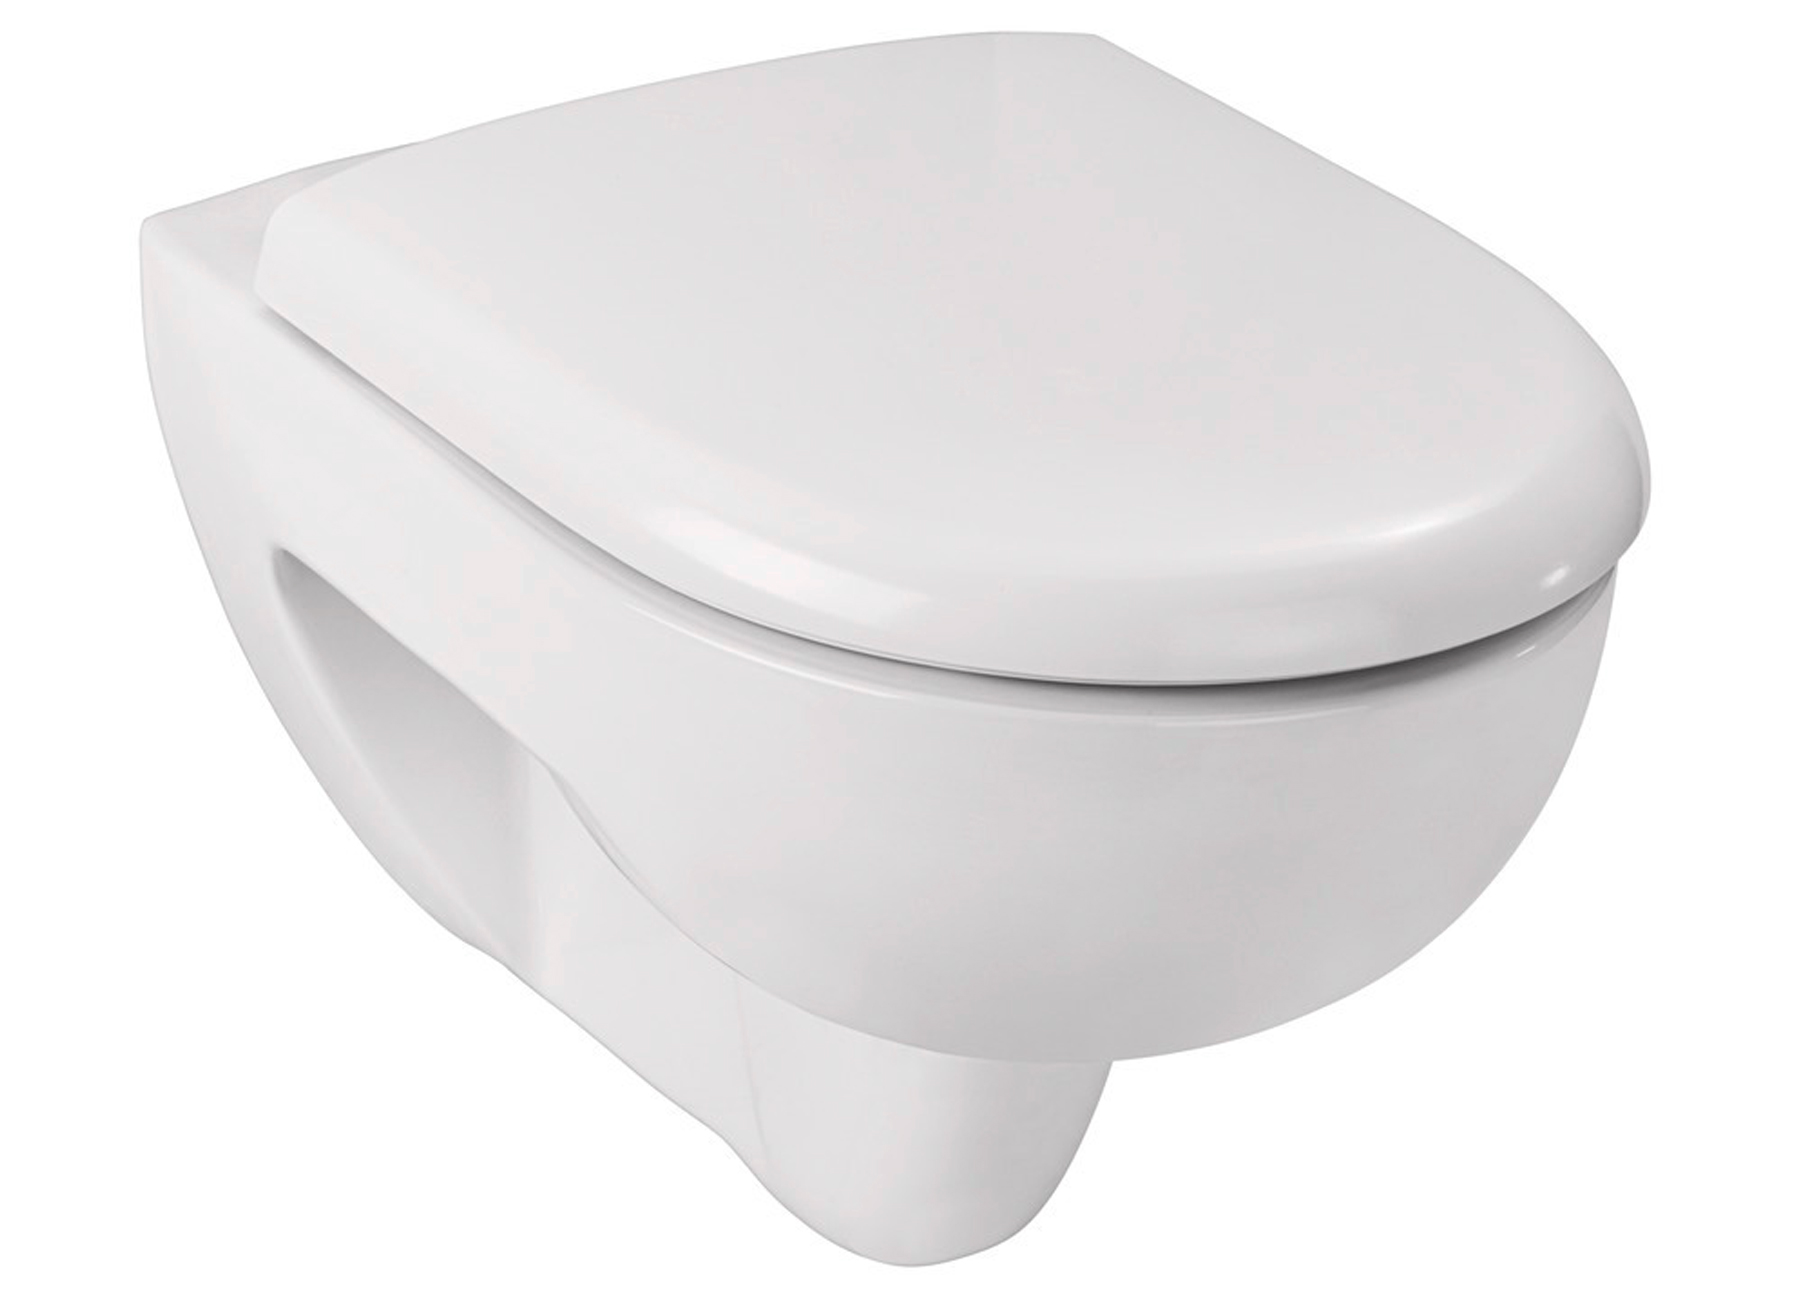 ABATTANT WC EXCLUSIVE N° 7 DUROPLAST EASYCLOSE